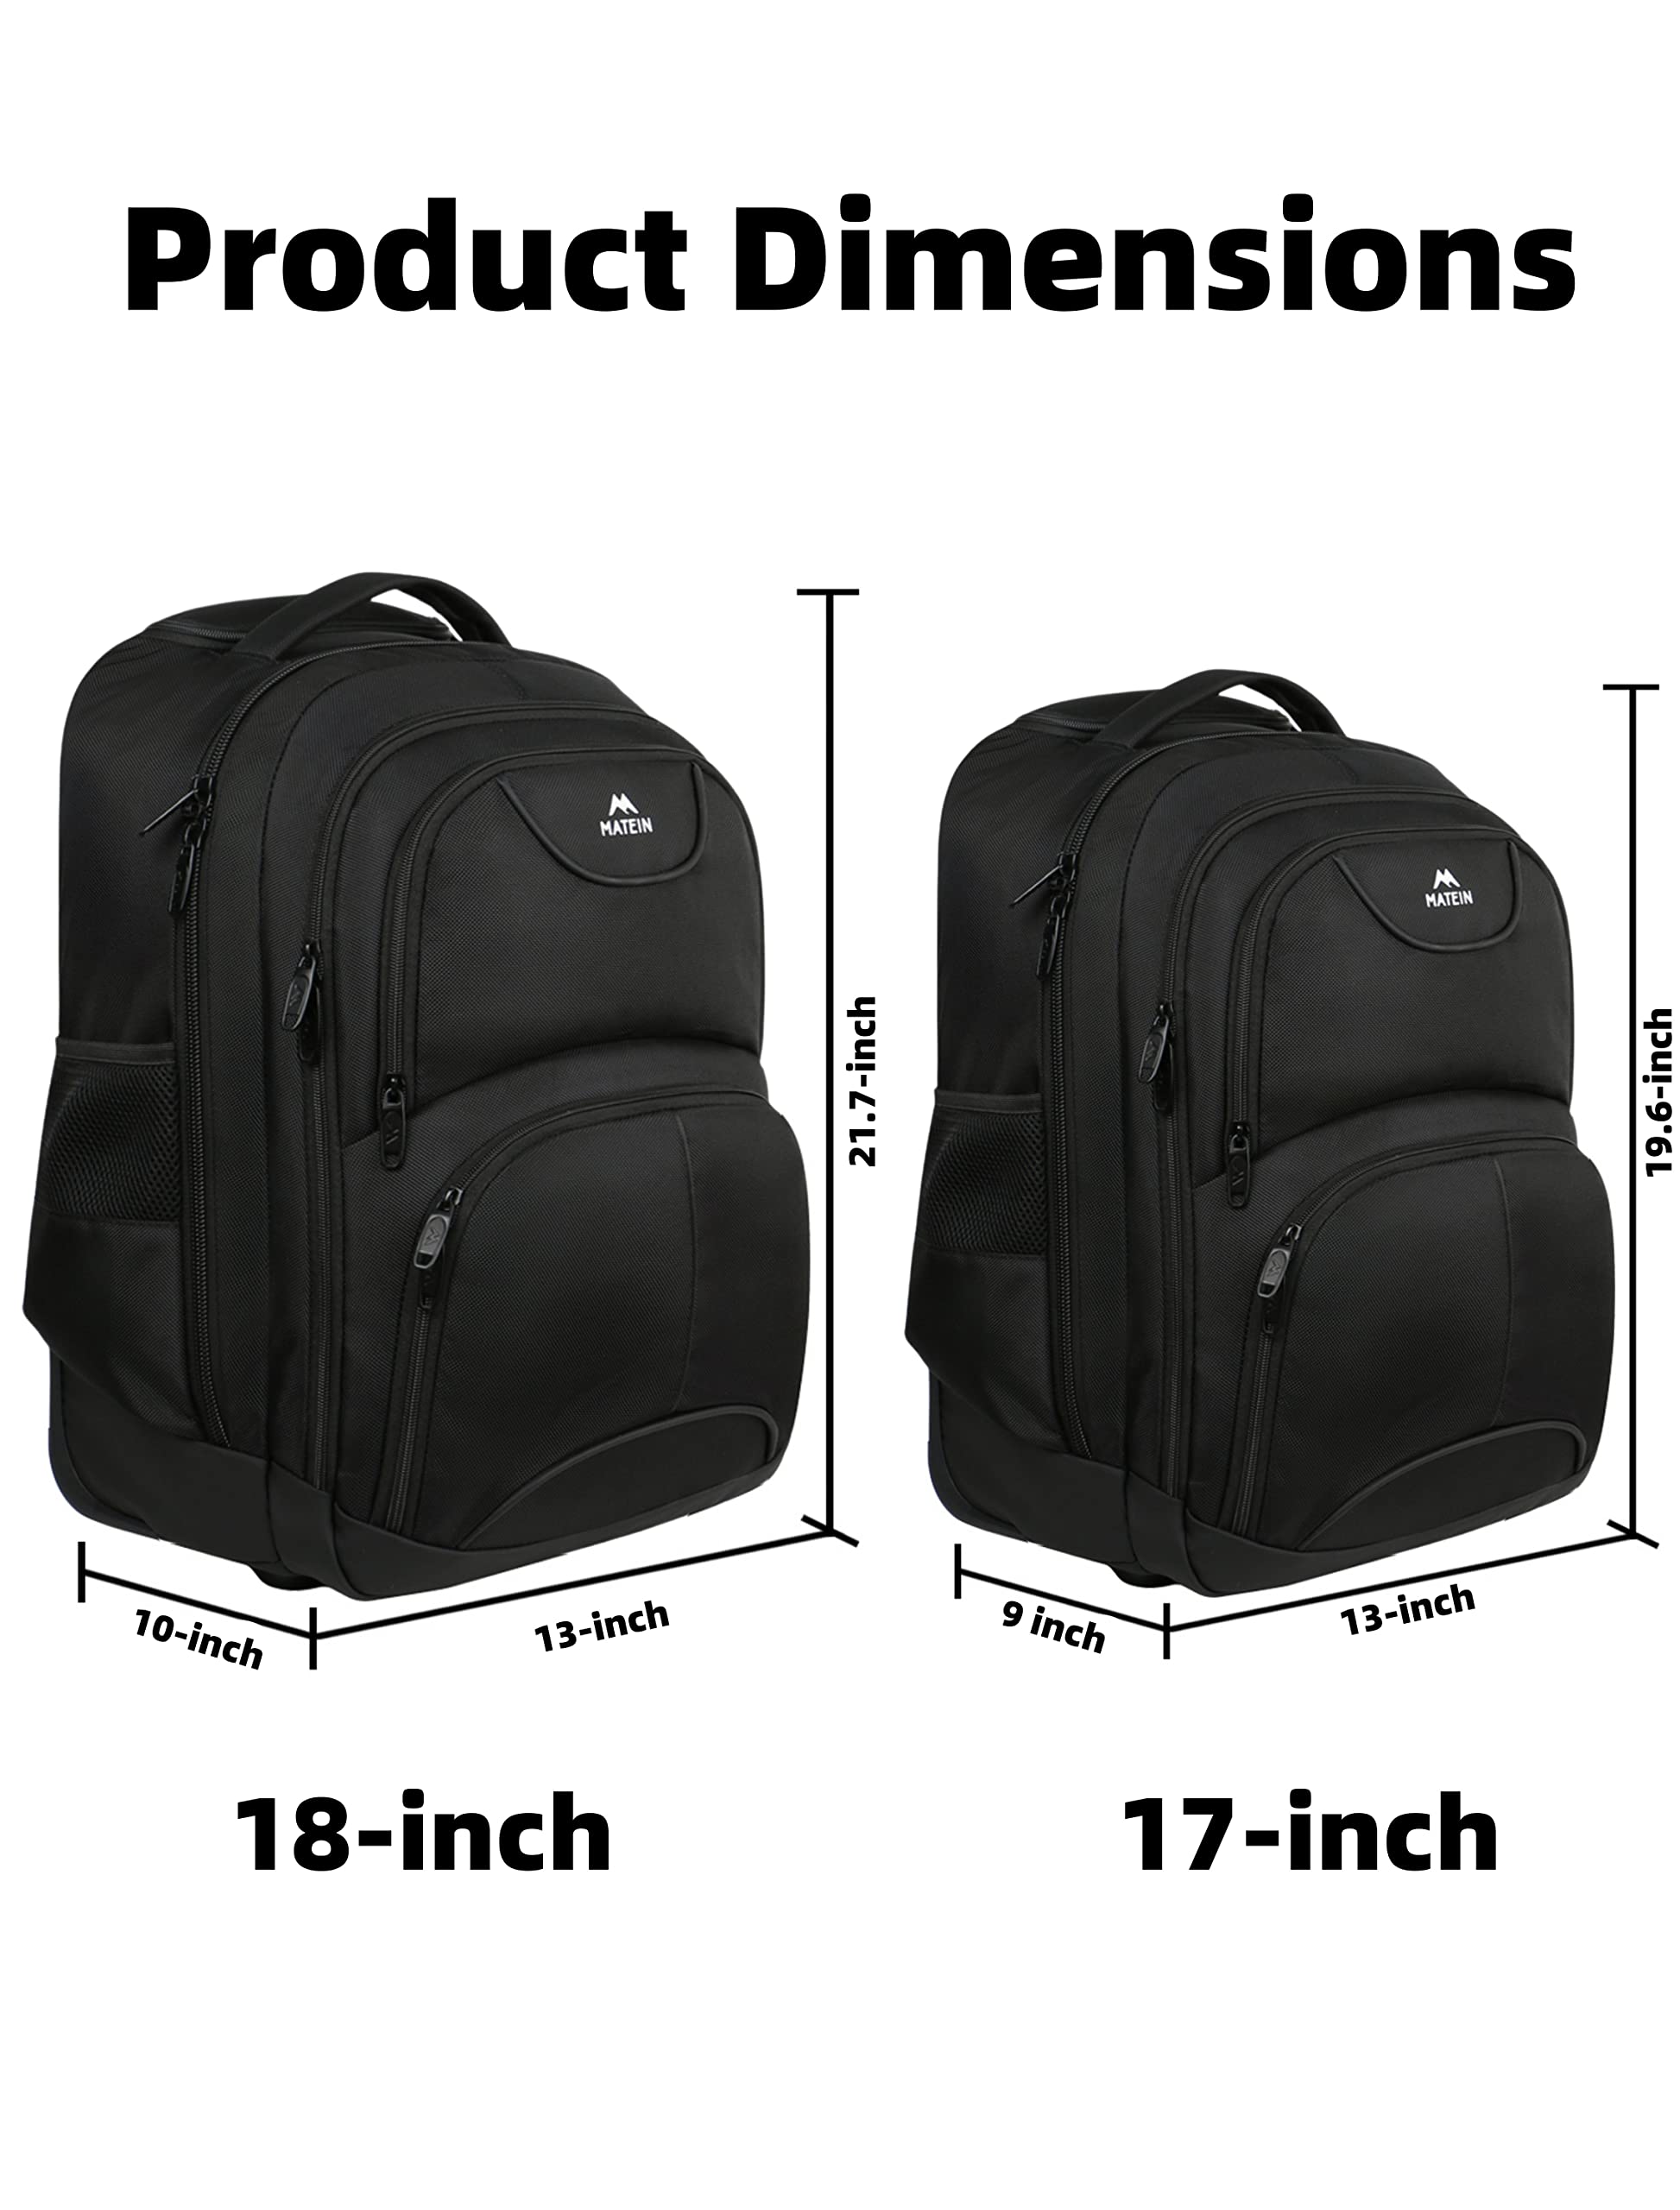 MATEIN Rolling Backpack, 17 inch Water Resistant Wheeled Laptop Backpack, Carry on Luggage Business Bag, Overnight College Computer Backpack Trolley Suitcase for Men Women Adults to Travel, Black